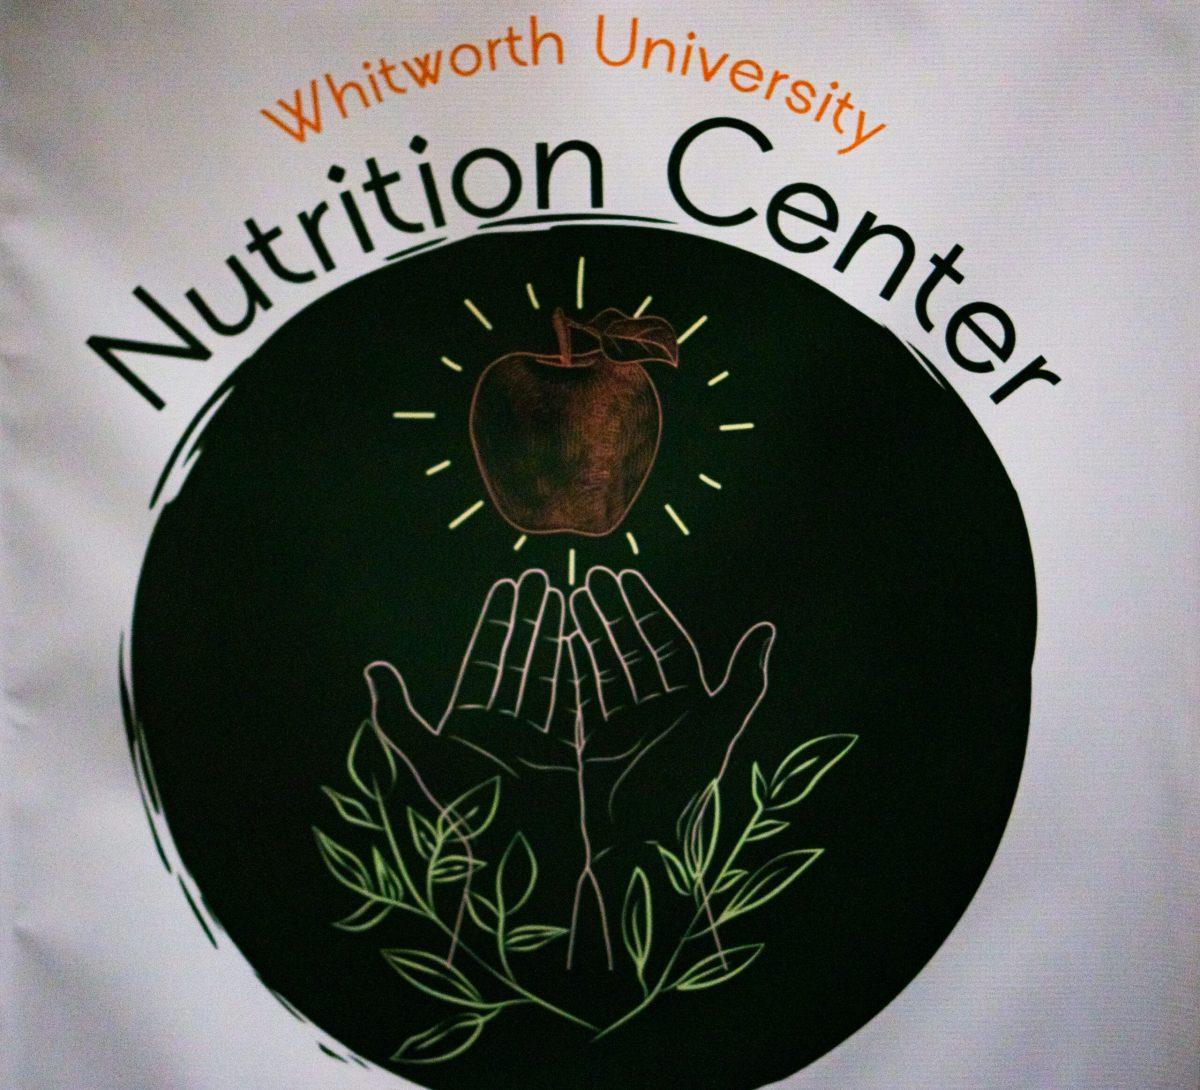 Pictures of Whitworth Nutrition Center at Whitworth university in Spokane Wash, Friday, Oct. 14, 2022 | Photo by Juan Rodriguez/The Whitworthian